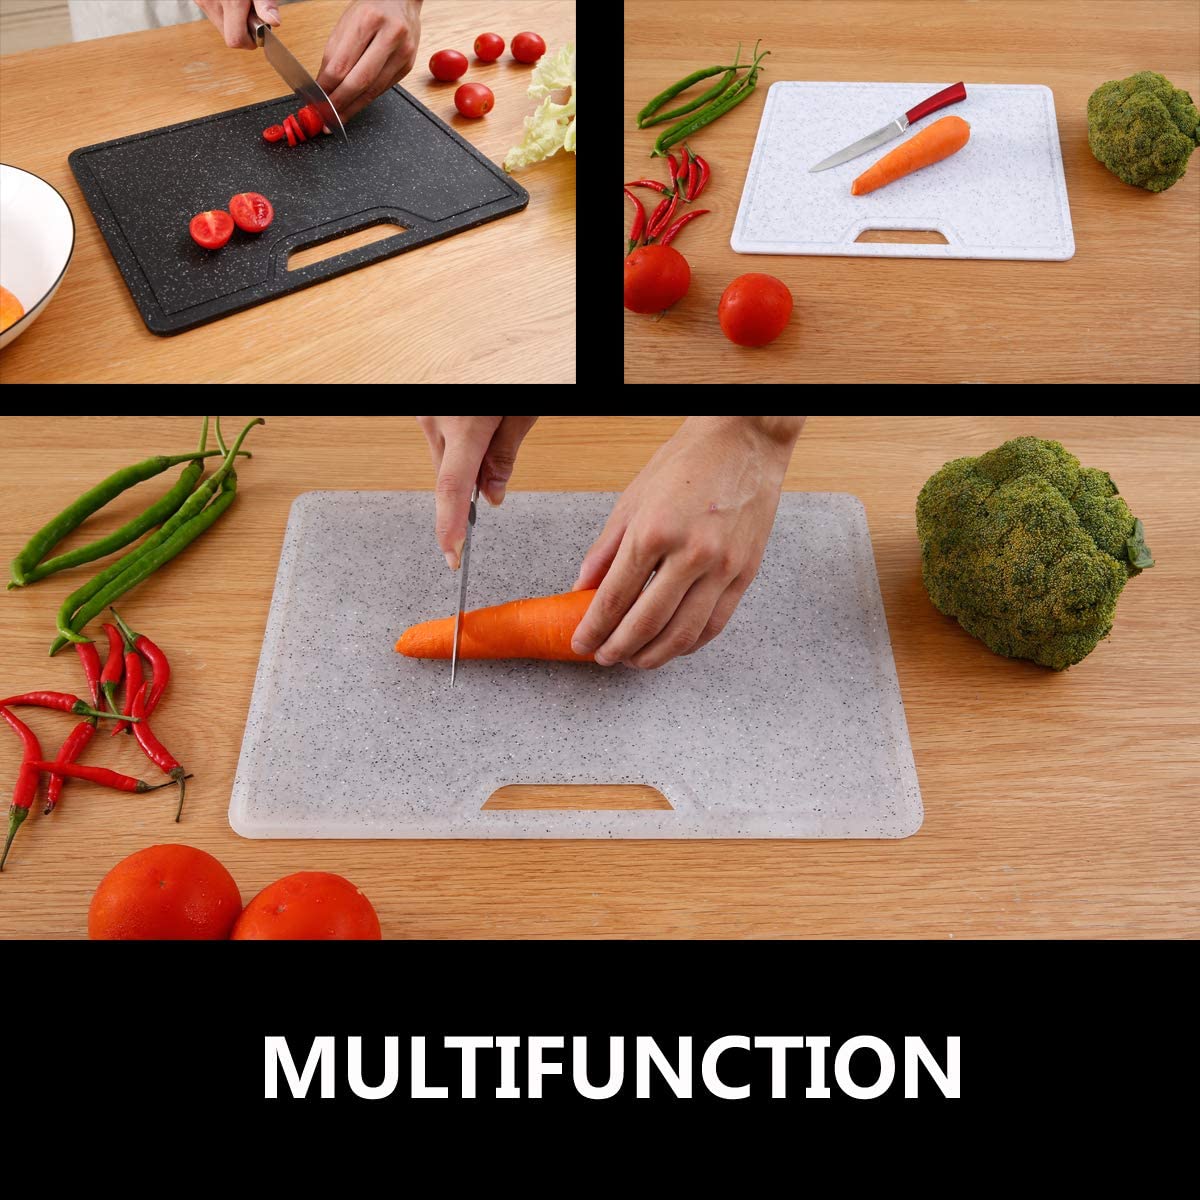 Plastic+Cutting+Board+Kitchen+%2CDishwasher+Safe%2C+Juice+Grooves%2C+Marble+Appearance%2C+Large+Thick+Boards%2C+Food+Safe+Material%2C+Non-Porous